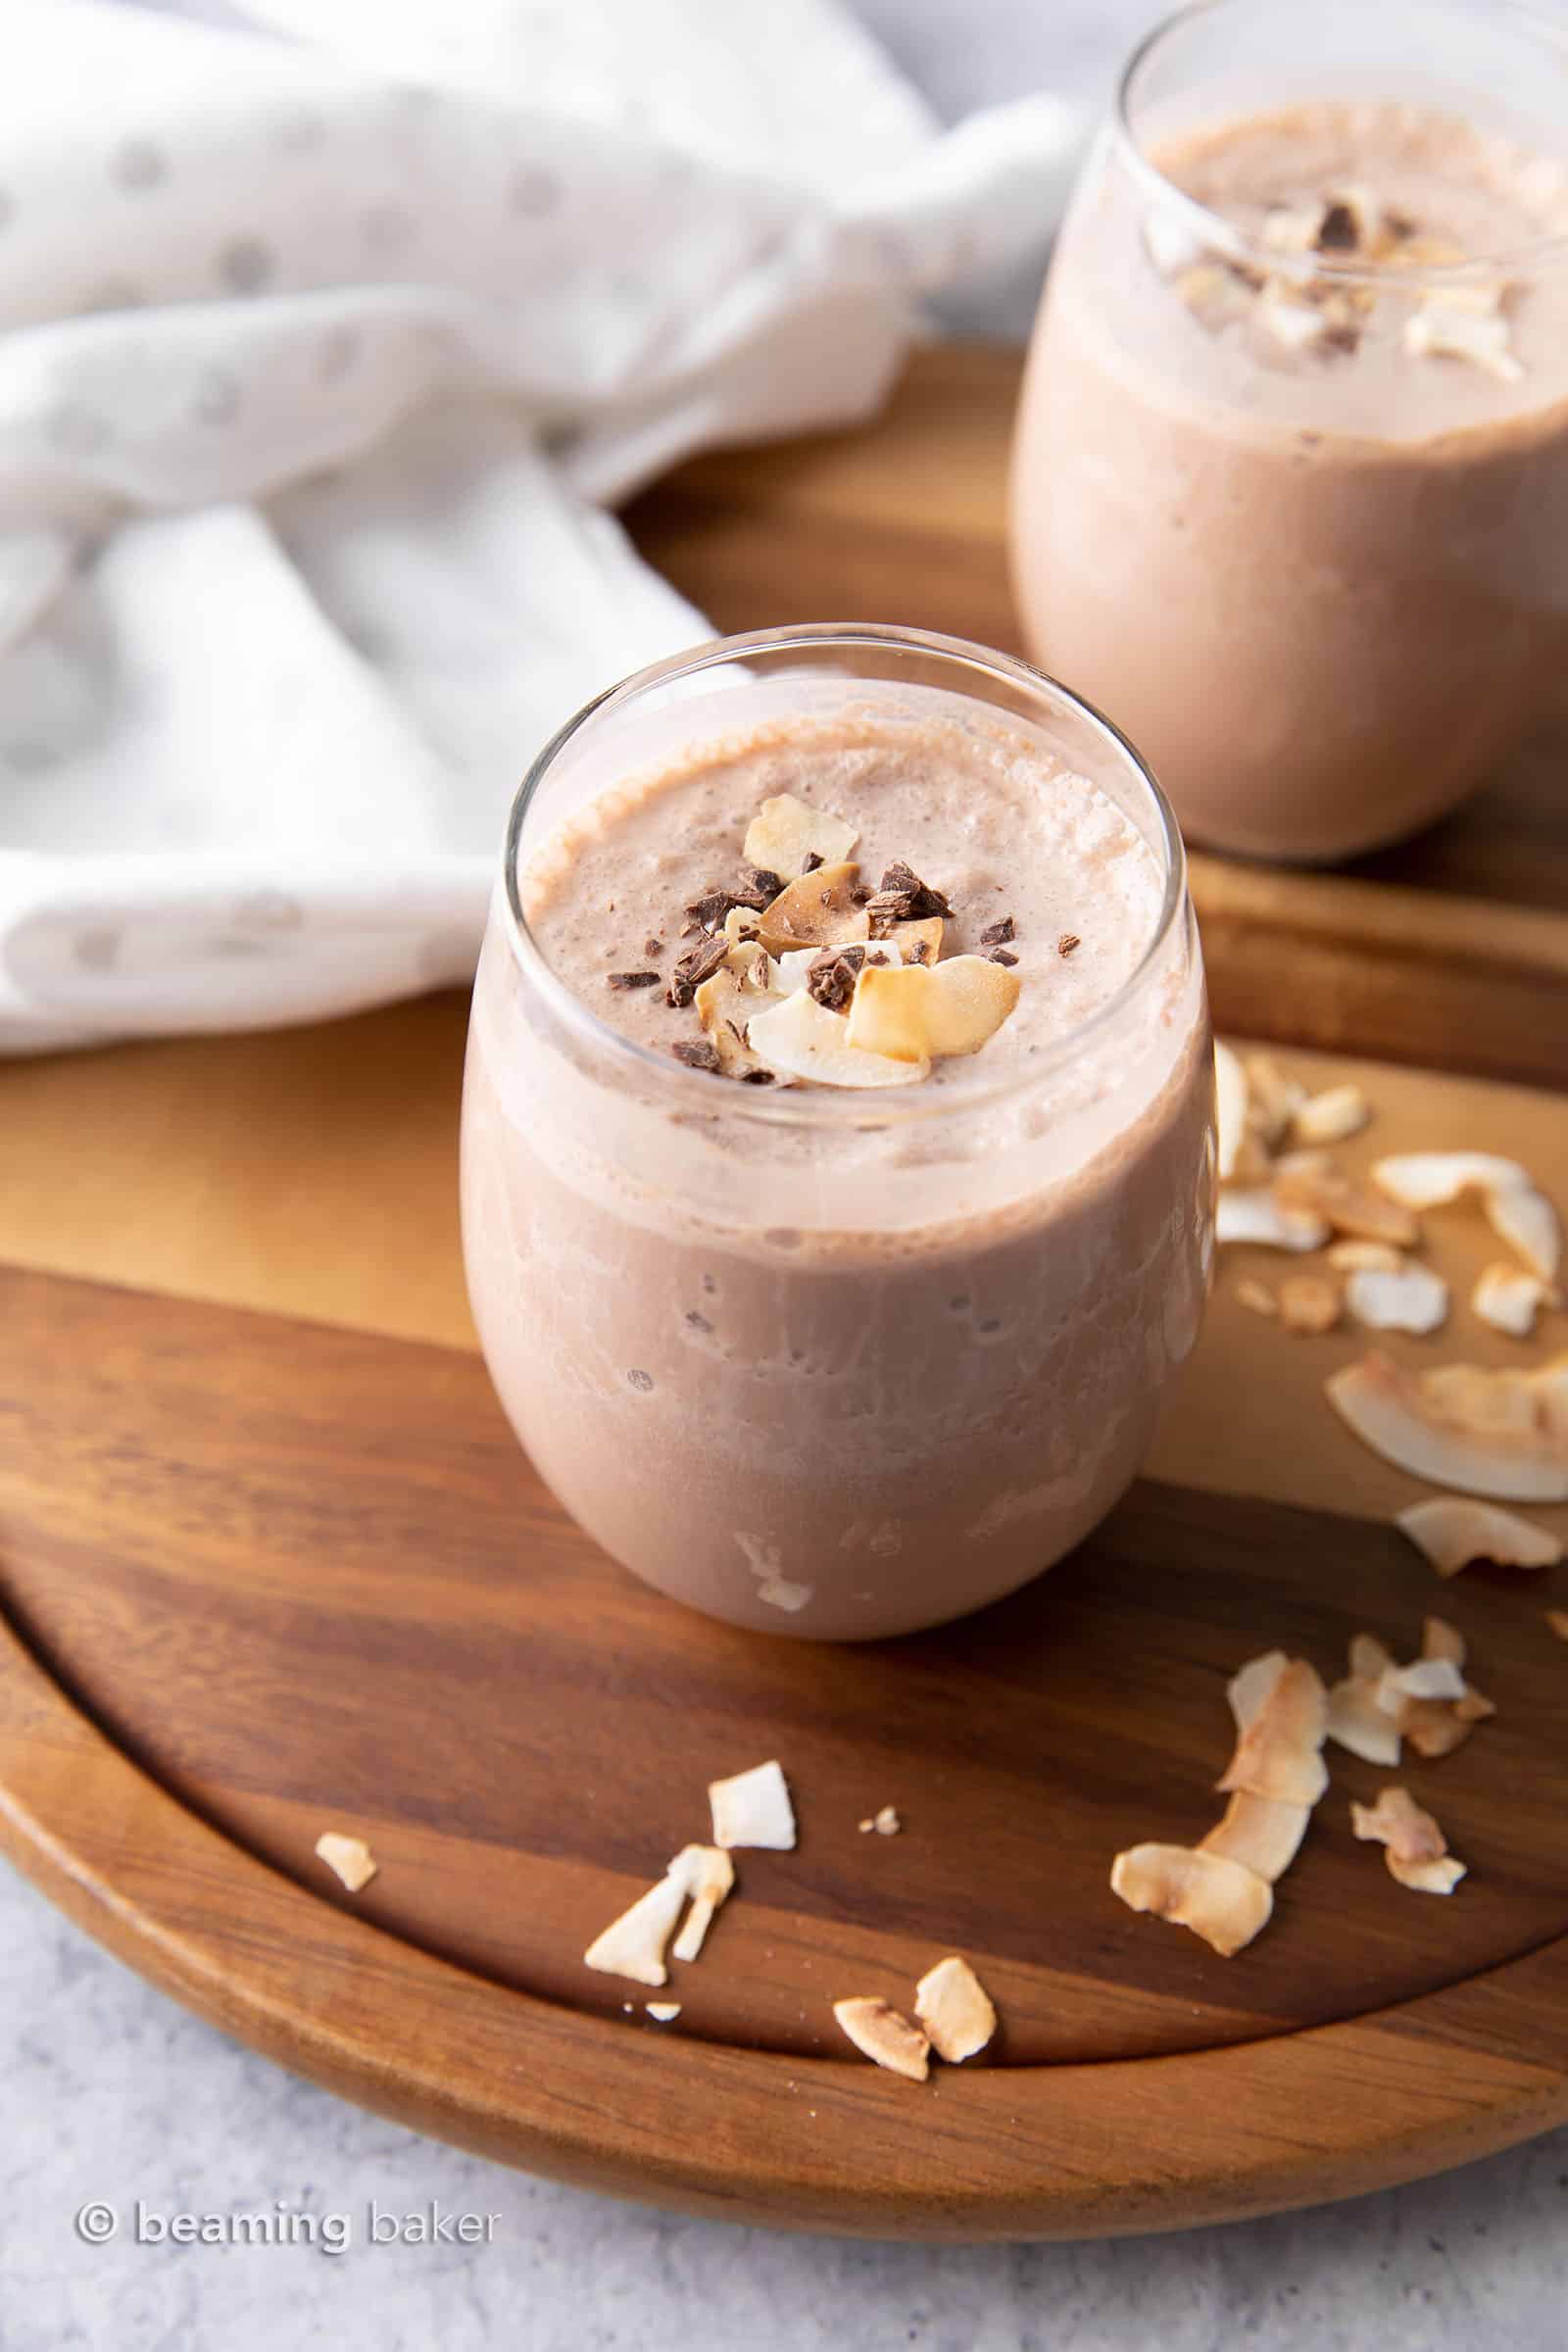 Coconut Chocolate Keto Smoothie: this keto protein smoothie recipe is delicious, easy to make & Low Carb! Just 6 ingredients for 12 grams of protein and only 3 net carbs. #LowCarb #HighProtein #Vegan #Smoothie | Recipe at BeamingBaker.com